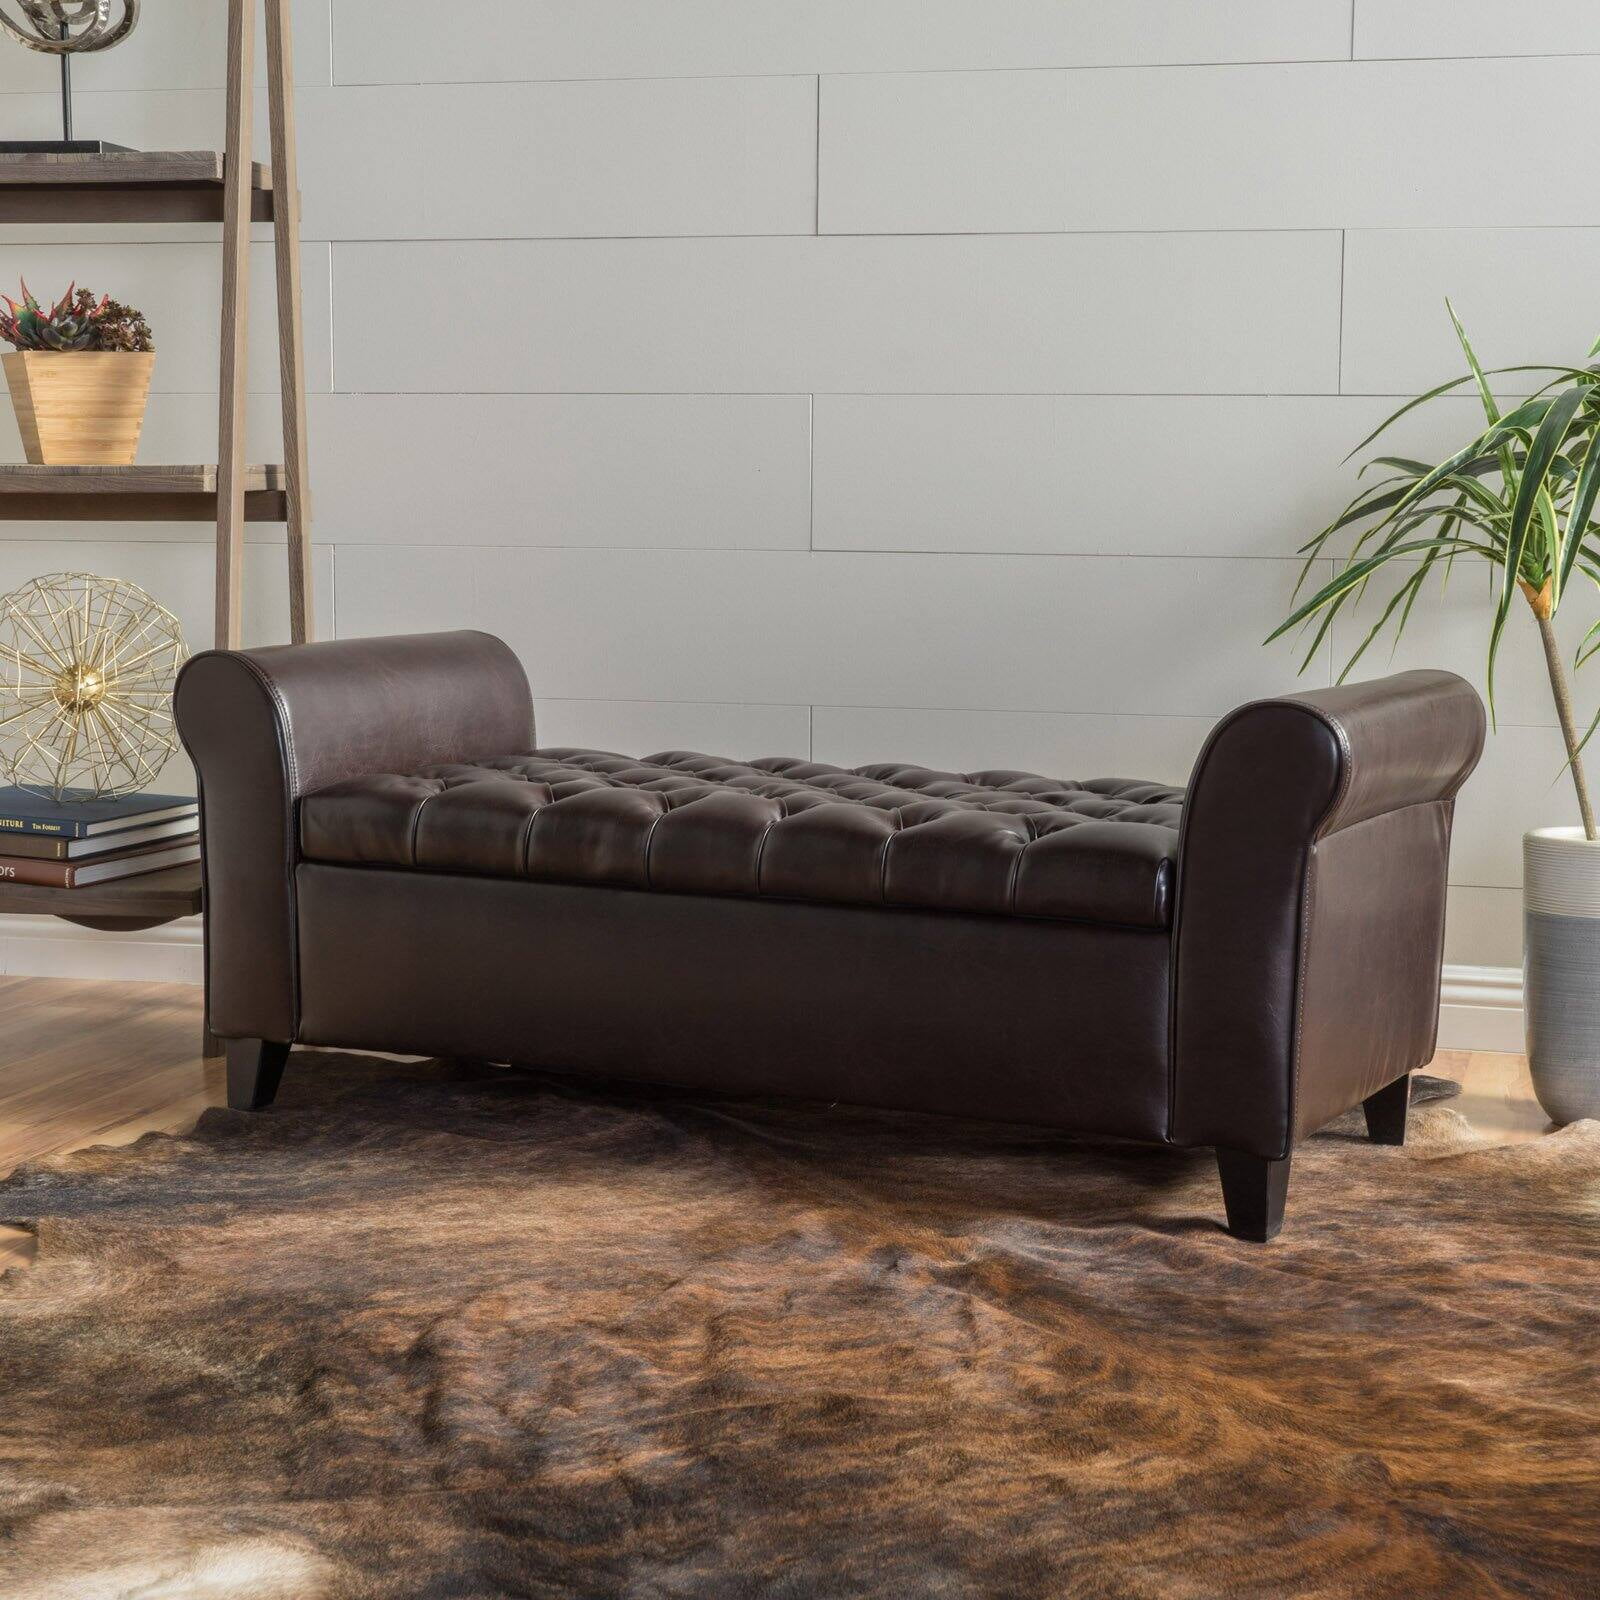 Ultima Leather Armed Indoor Storage, Leather Bench With Storage